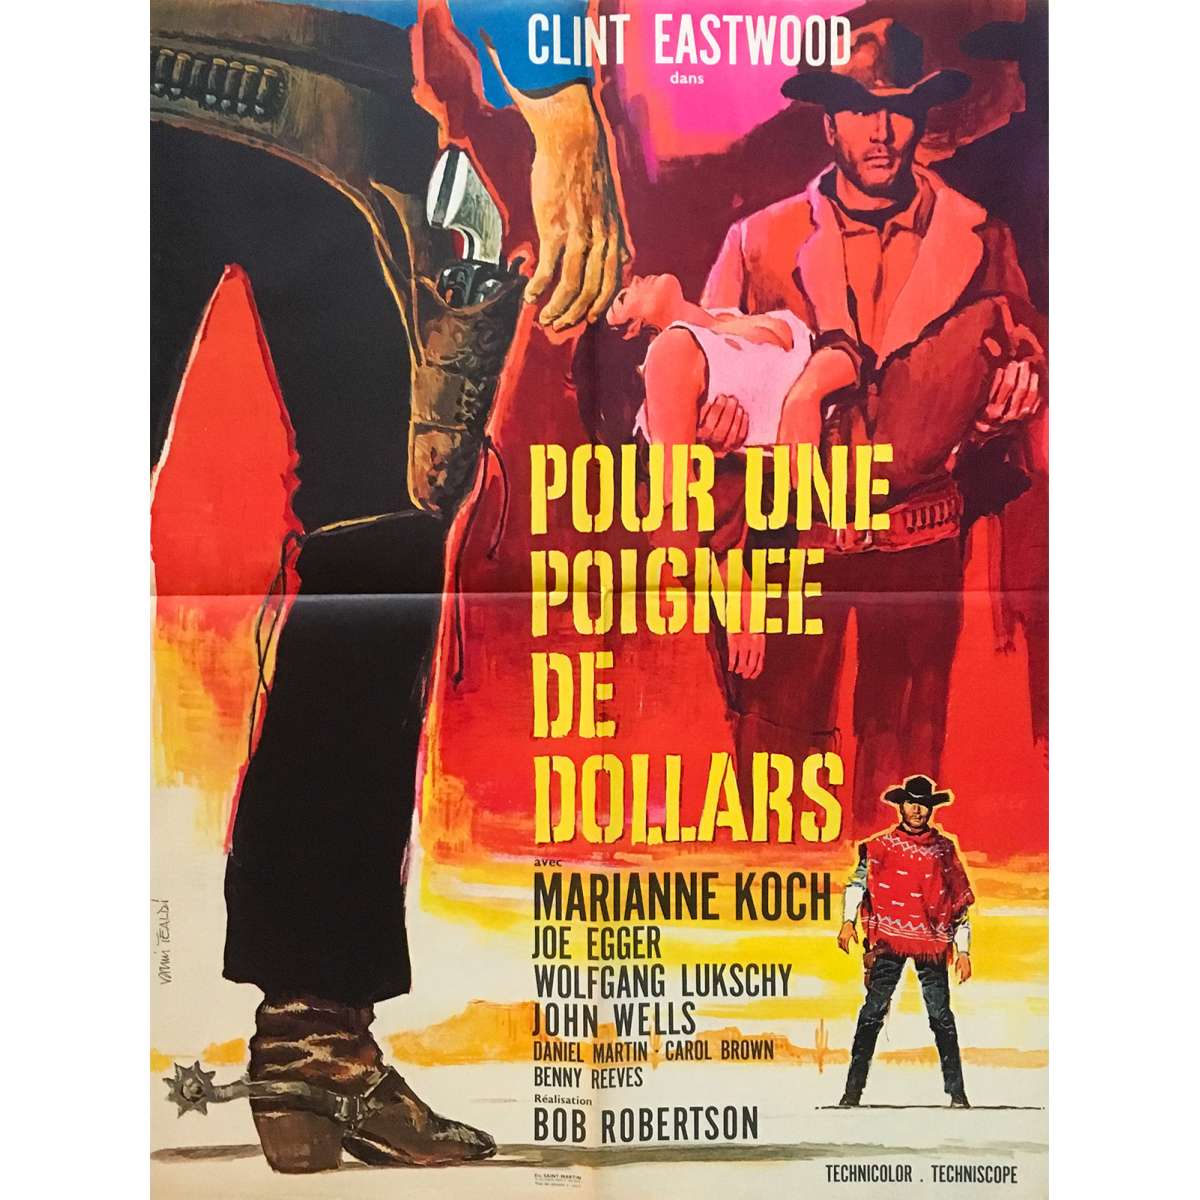 A FISTFUL OF DOLLARS Movie Poster 23x32 in.